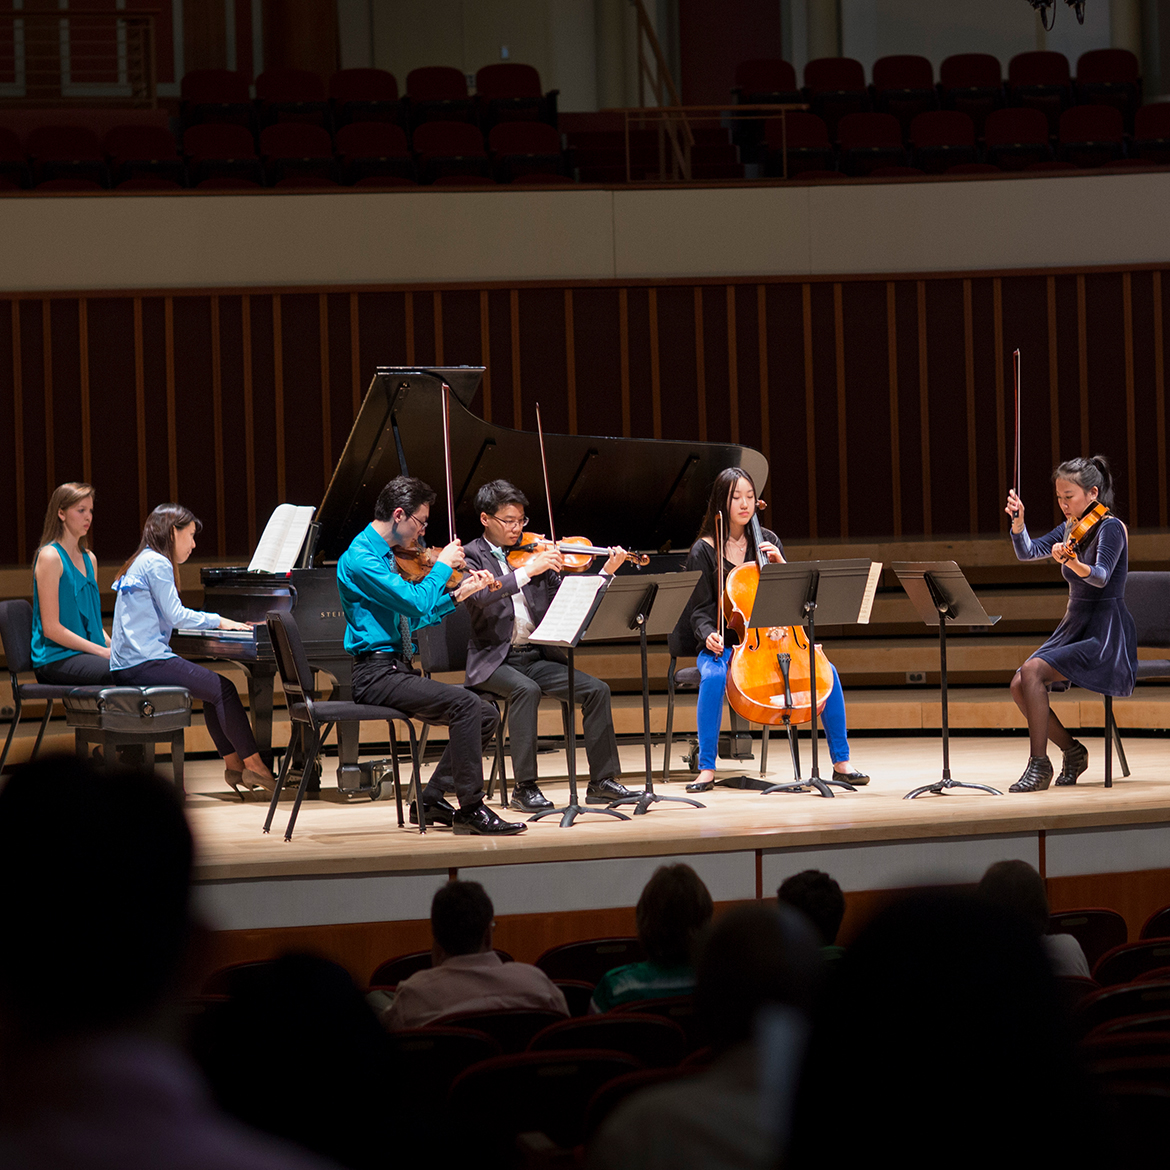 chamber music group rehearsing on stage